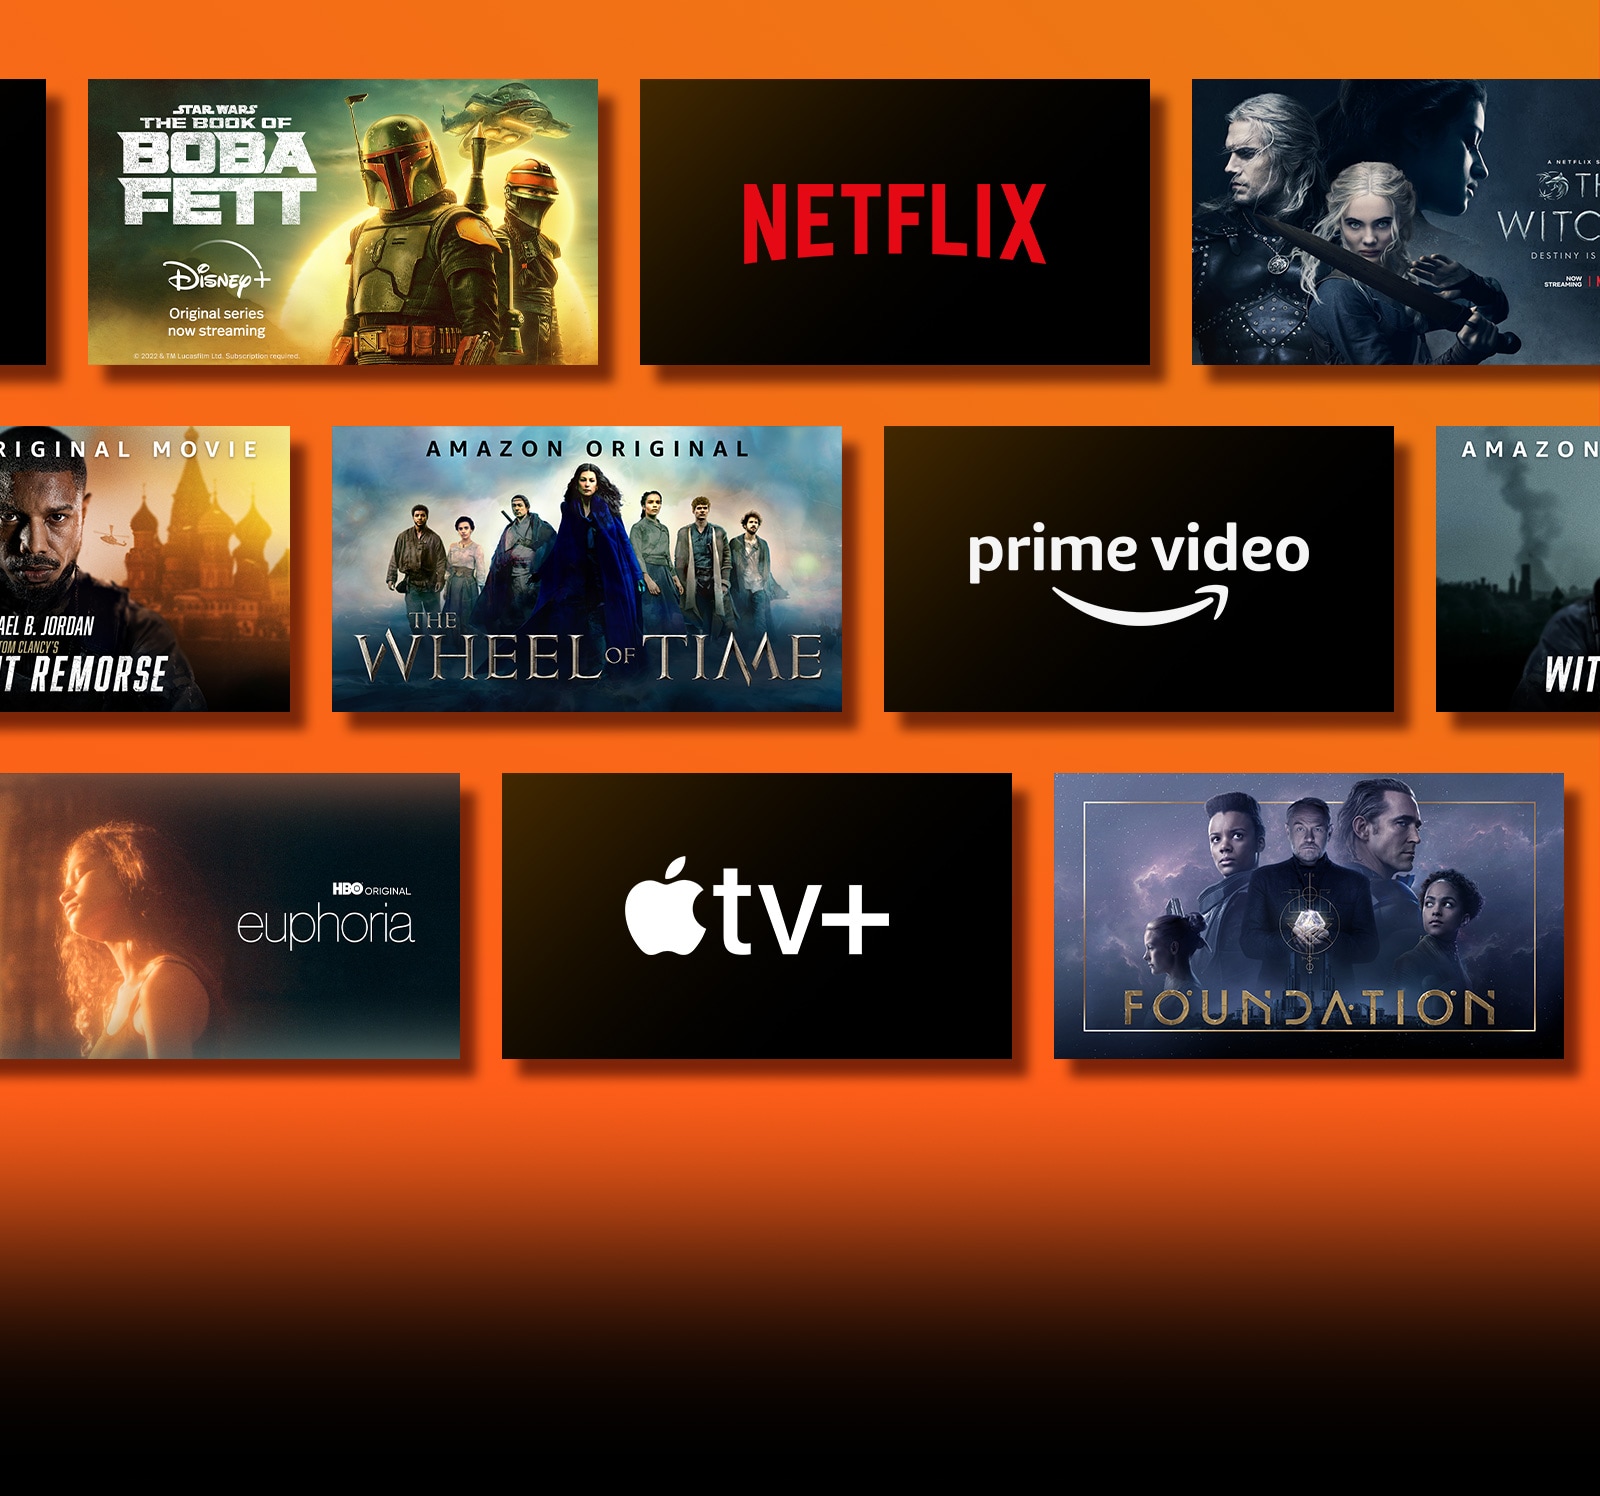 There are streaming service platform logos and matching footage right next to each logo. Netflix logo and money heist and The Witcher. Disney logo and Boba Fett. Prime Video logo and Without Remorse and The Wheel of Time. Livenow logo and promotional image of mamamoo and OneUs. HBO Max and The Wire and Euphoria logo. Apple TV plus and Foundation and Finch logo.